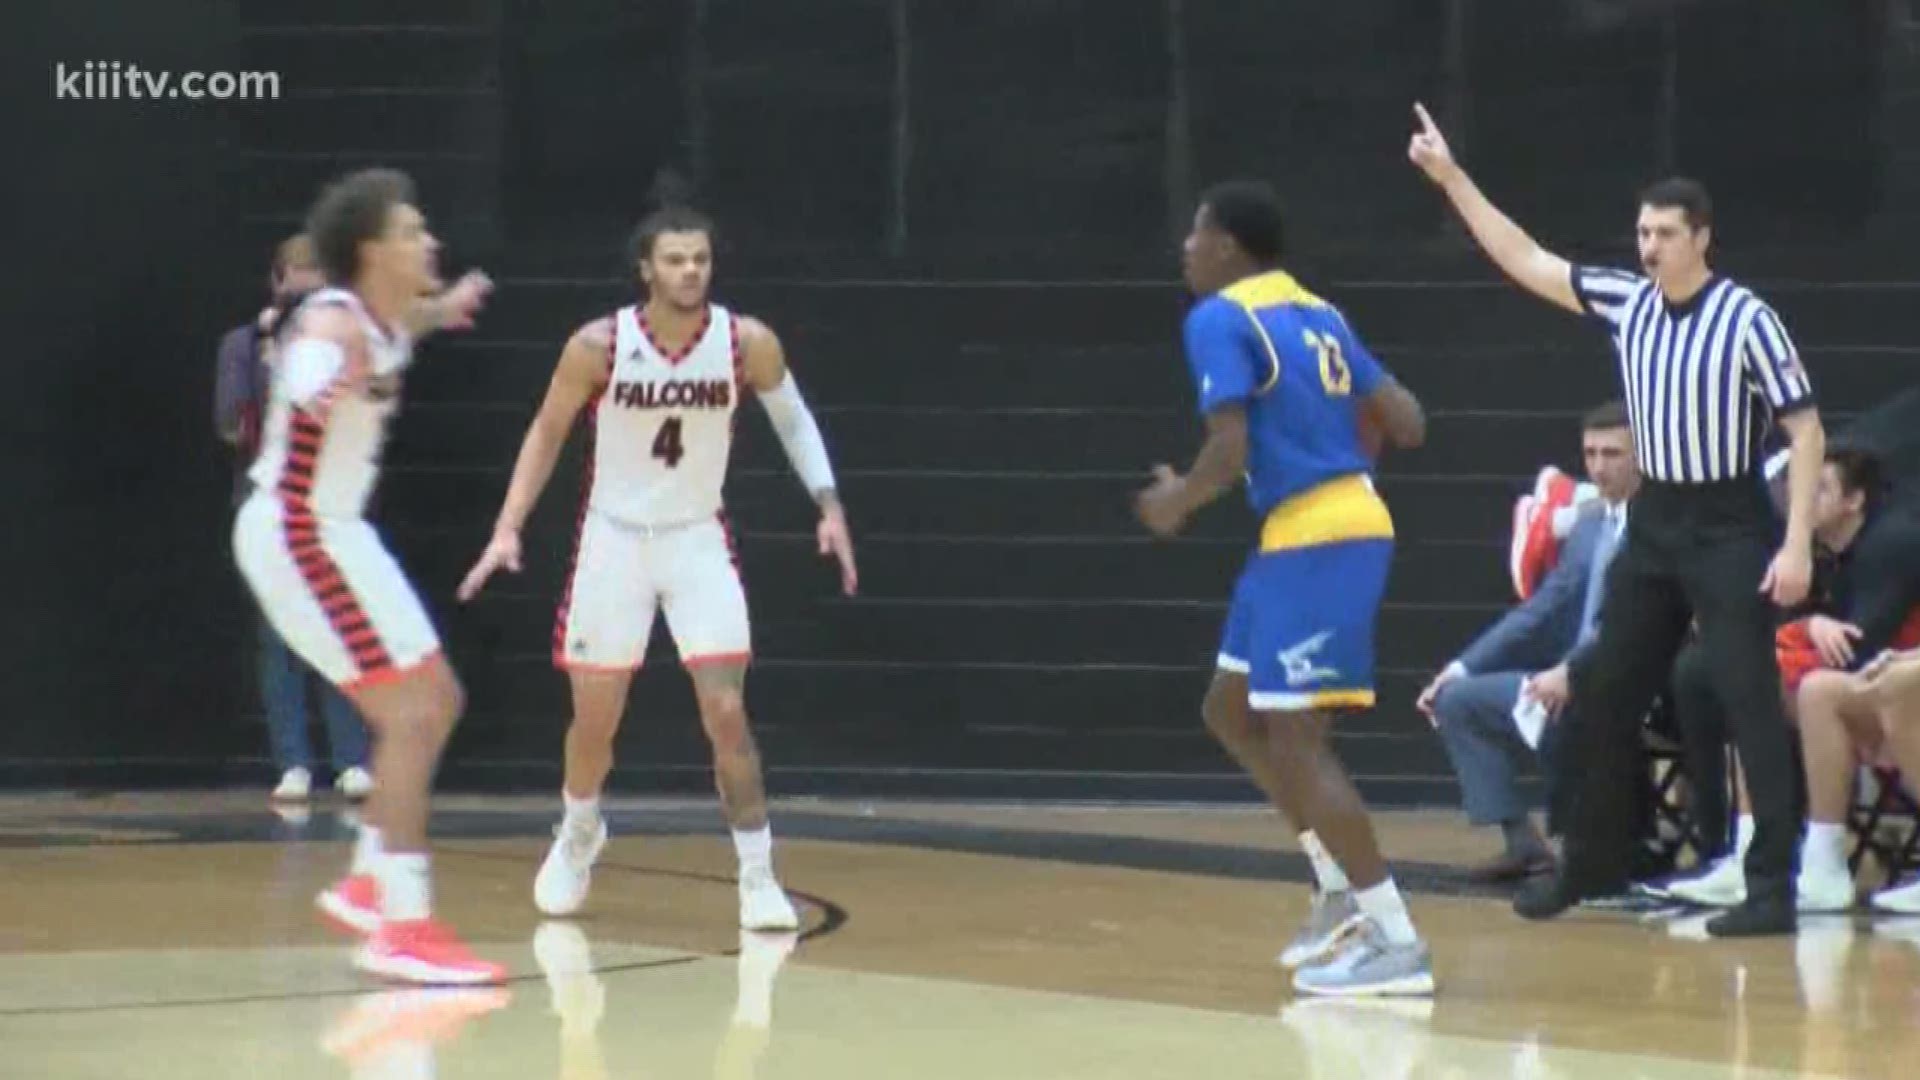 Texas A&M-Kingsville men's and Women's basketball both left Odessa with wins over UT Permian Basin.